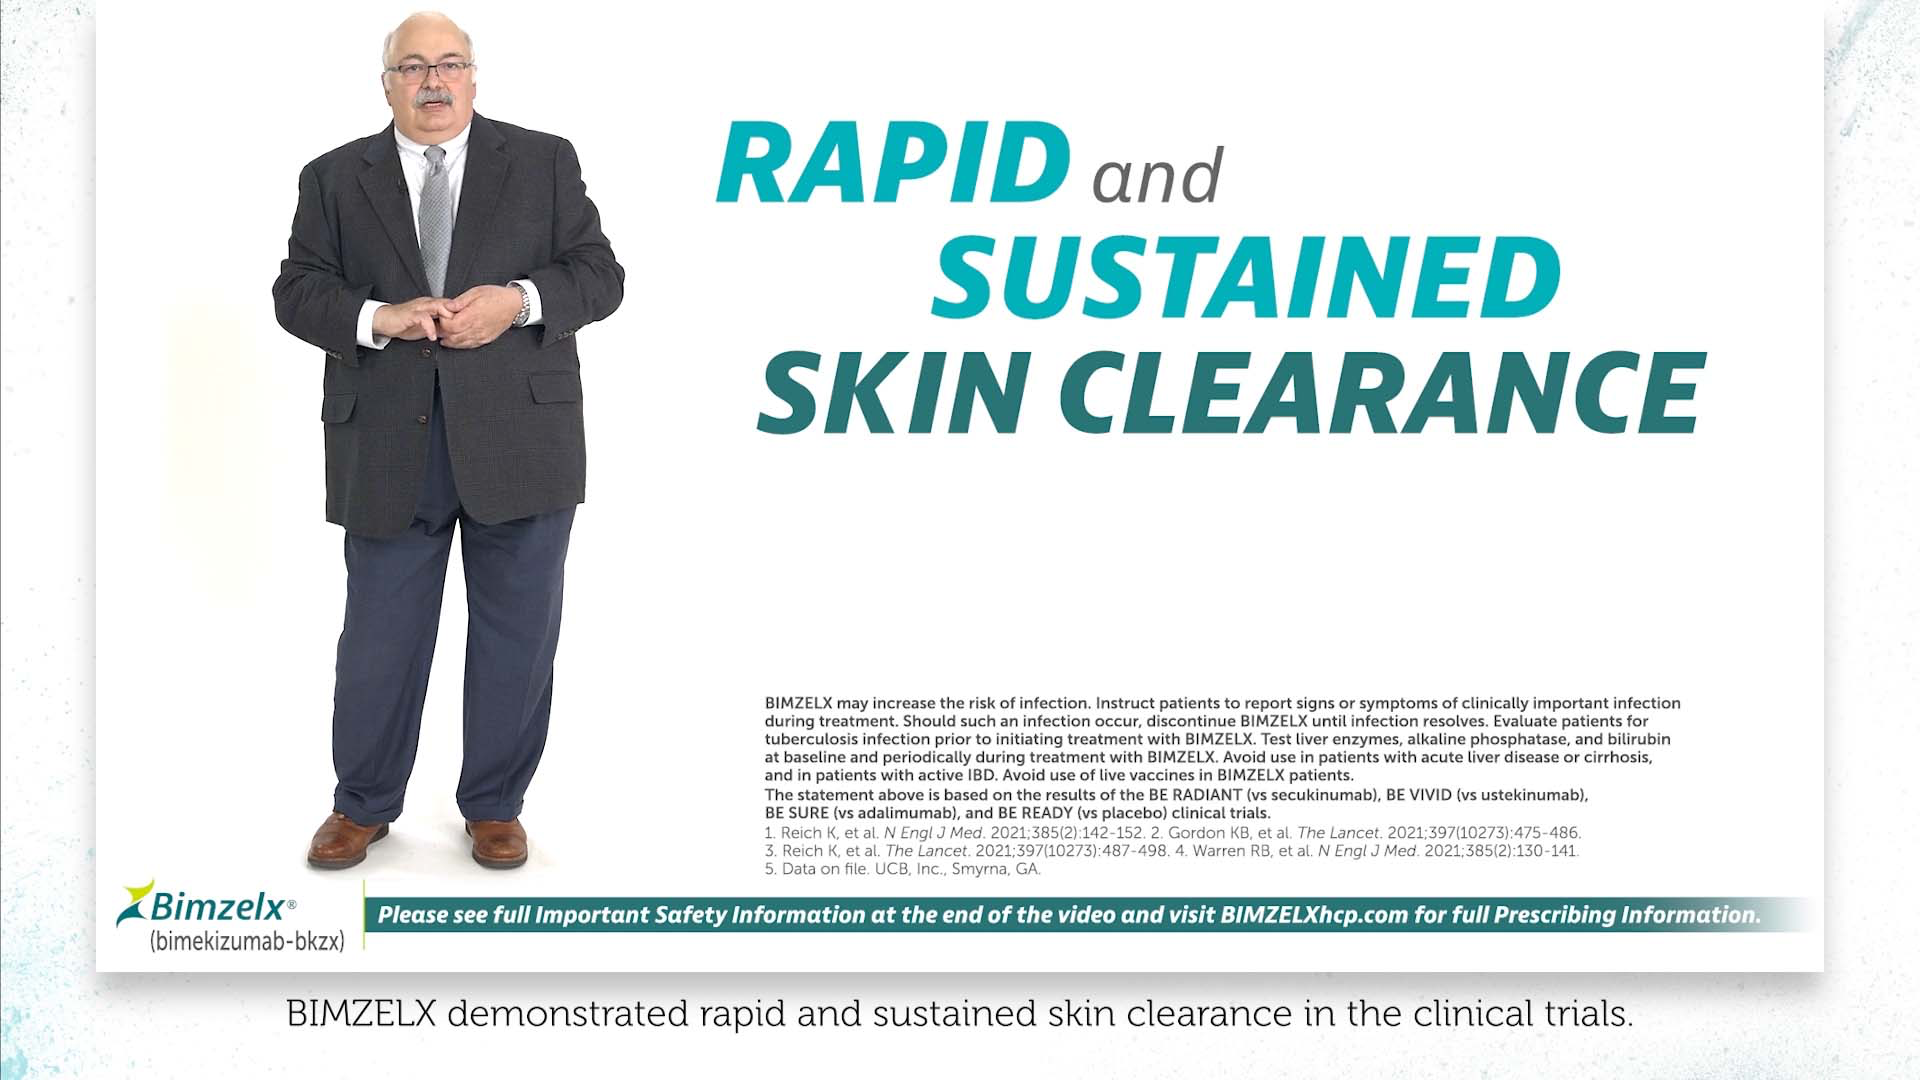 BIMZELX rapid response video for HCPs — Dr. Craig Leonardi speaking to the camera. The words, “Rapid and sustained skin clearance” appear onscreen.